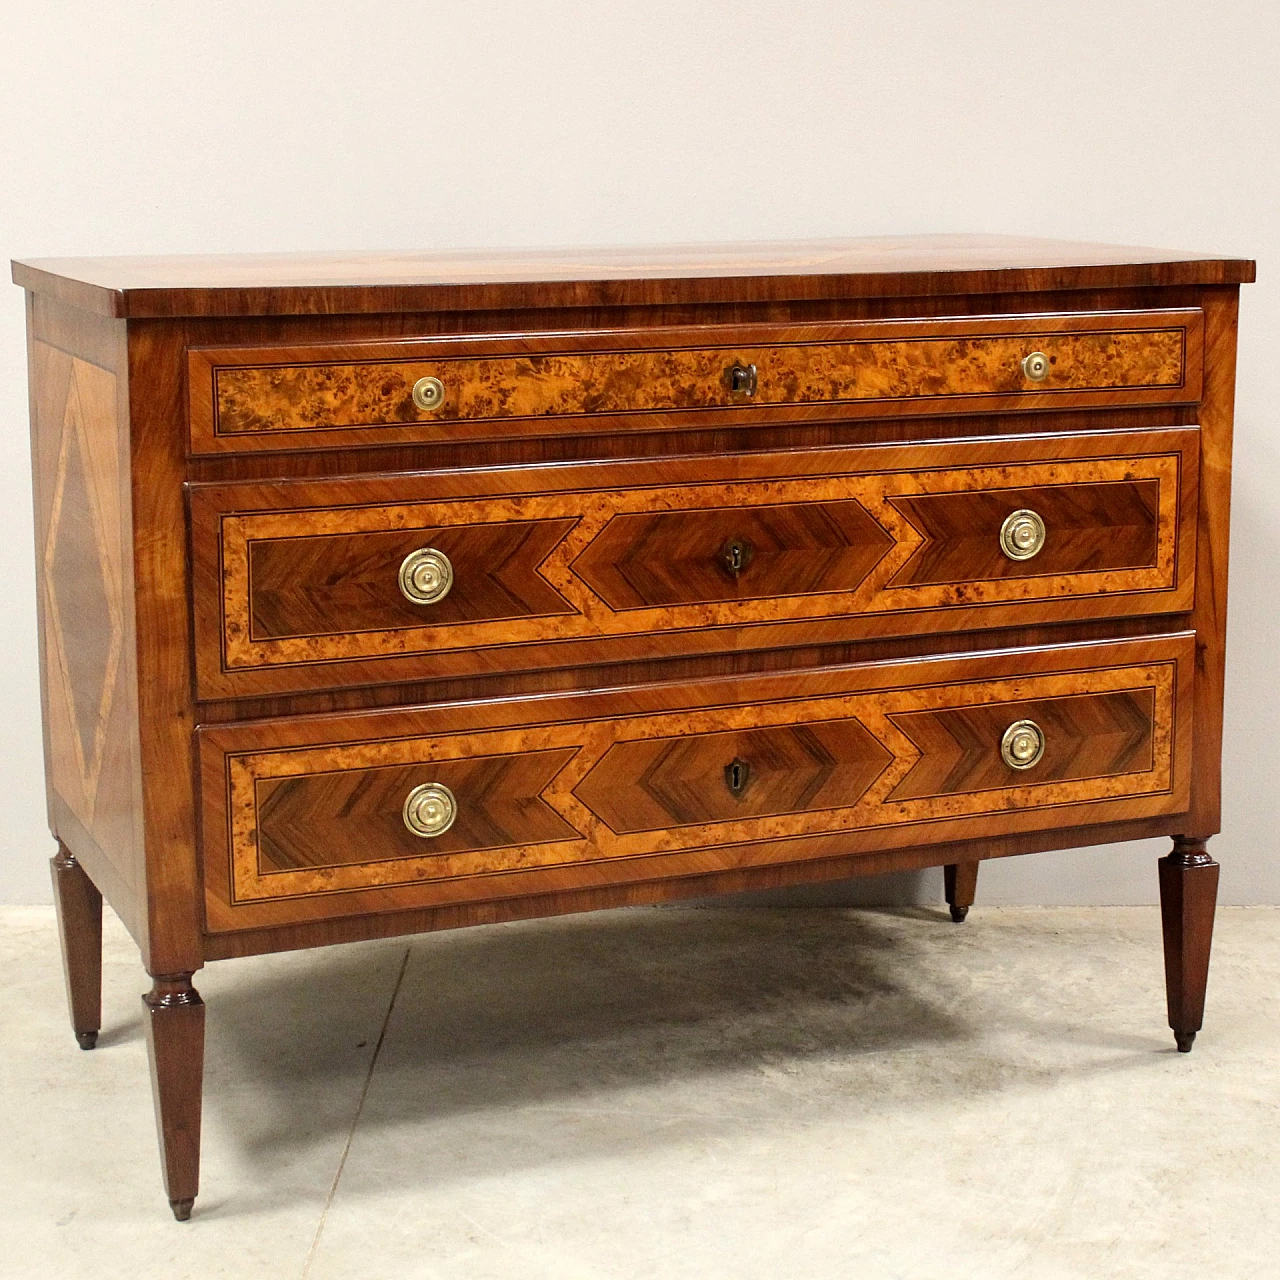 Emilian Louis XVI walnut and cherry commode with inlays, 18th century 1